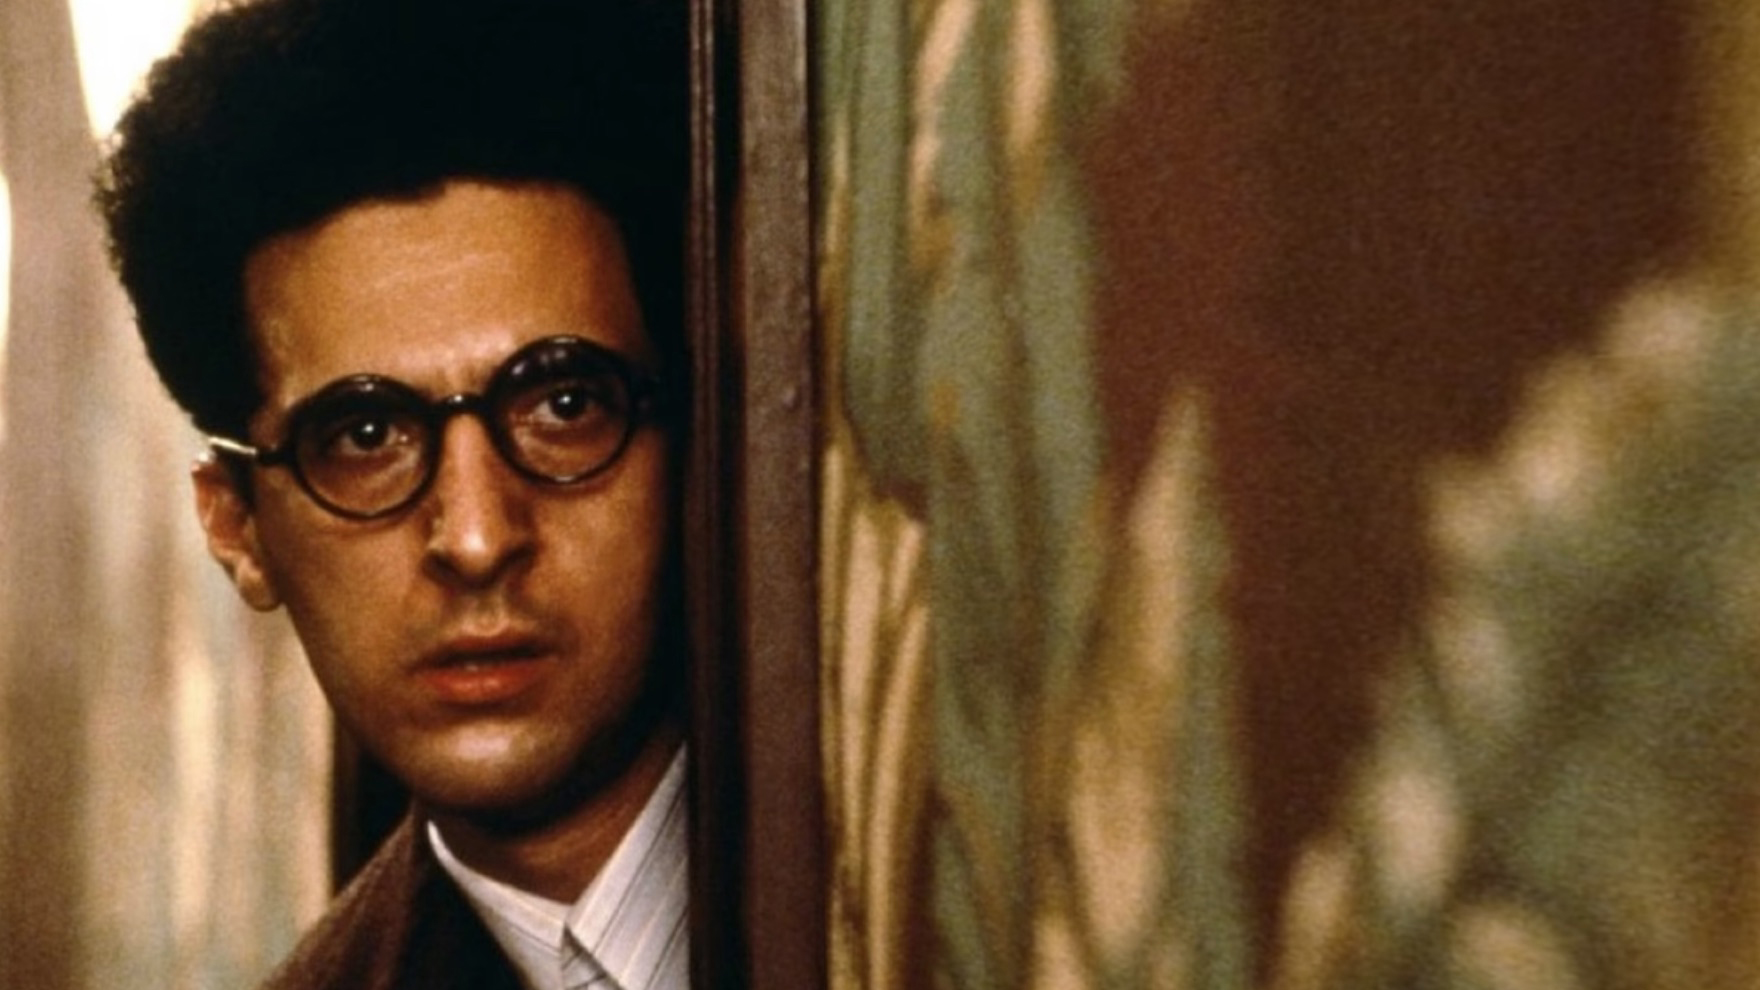 Film still showing head and shoulders of an anxious looking man with glasses and short curly hair  peering around the edge of a door